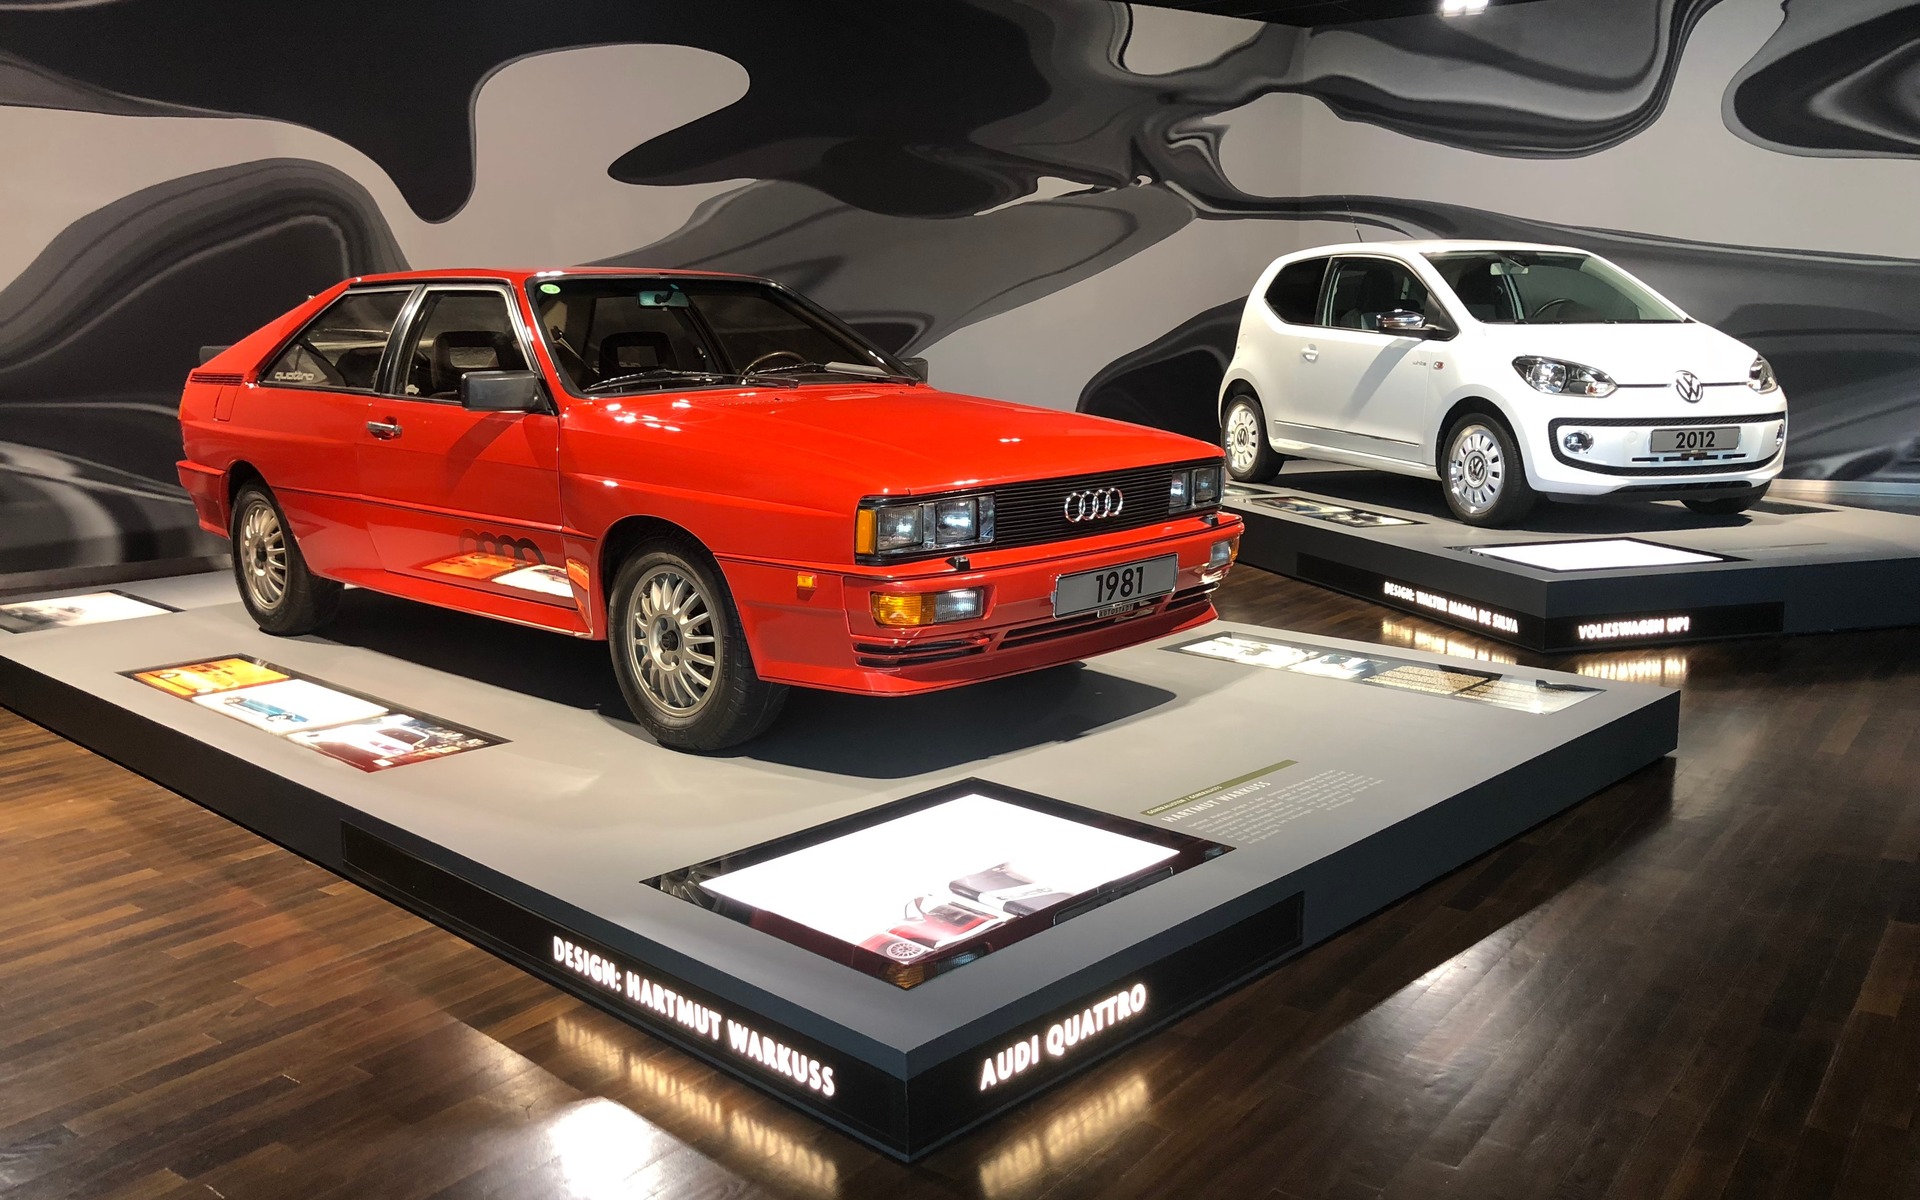 <p>Audi and Volkswagen display at the Autostadt</p>